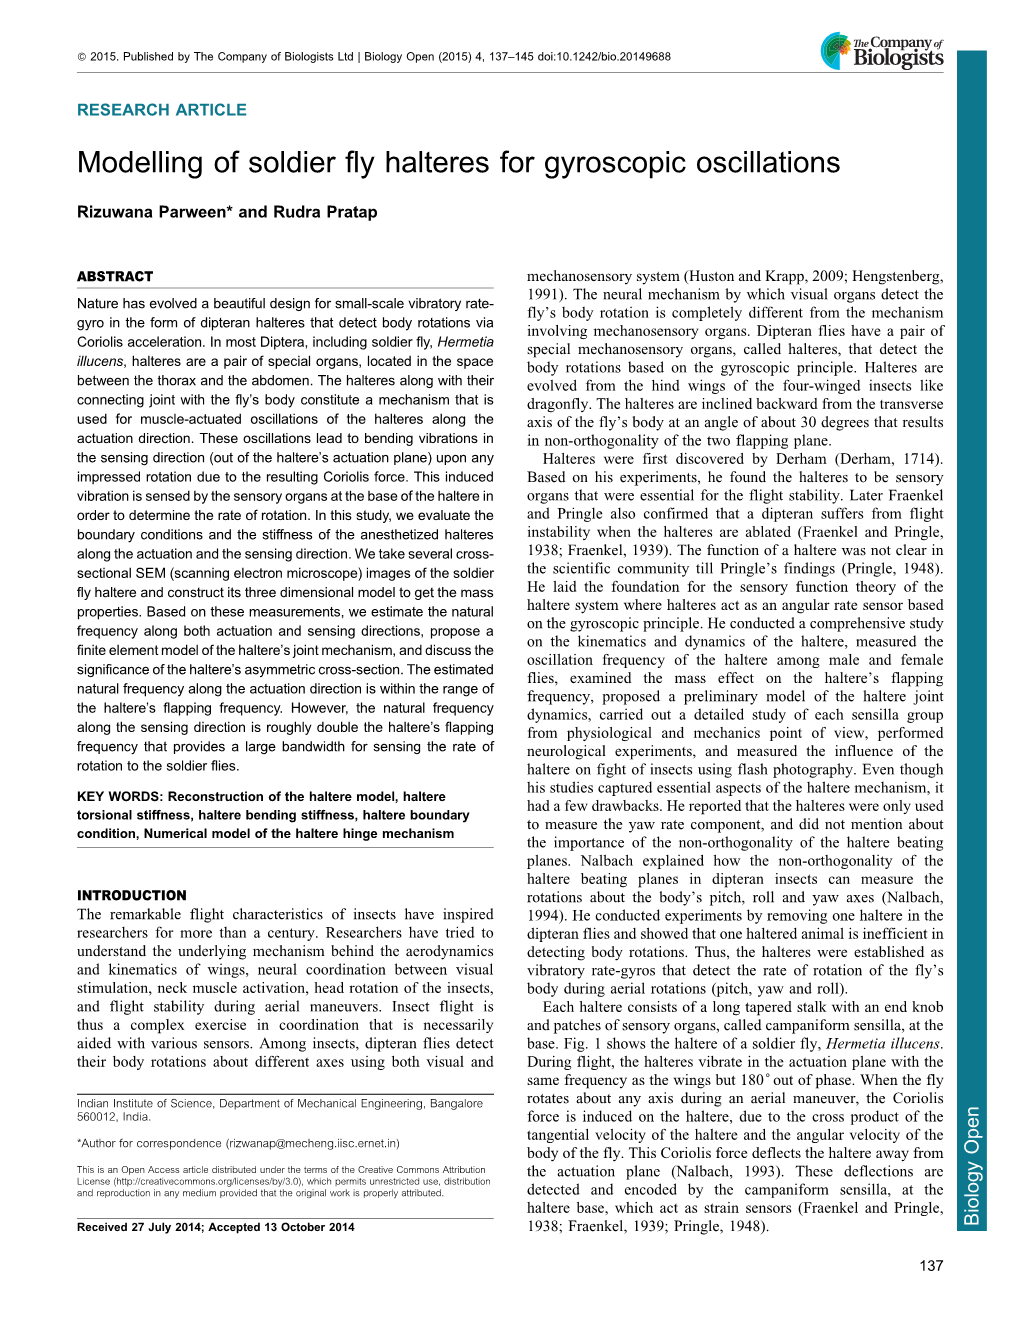 Modelling of Soldier Fly Halteres for Gyroscopic Oscillations